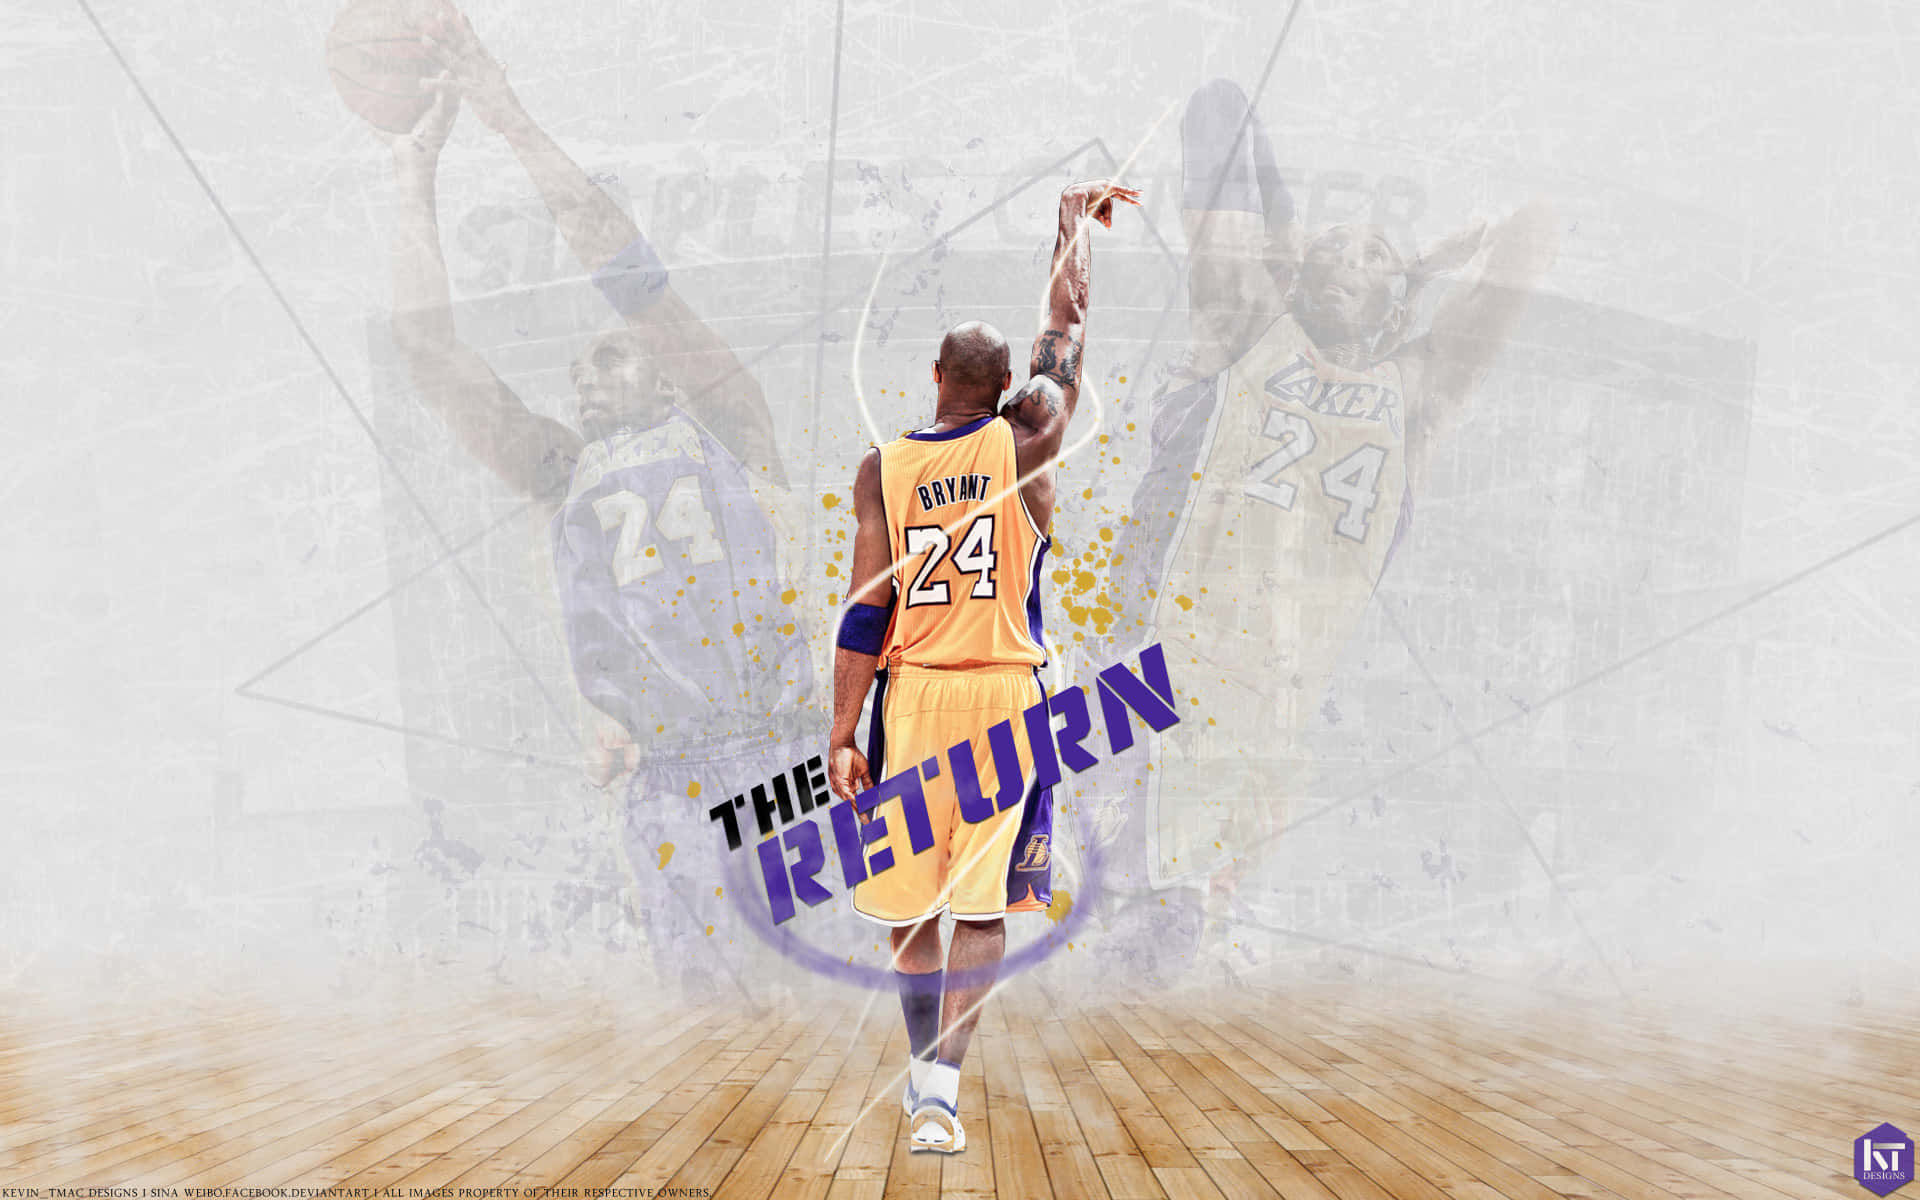 "Fire and ice - Kobe Bryant of the Los Angeles Lakers". Wallpaper